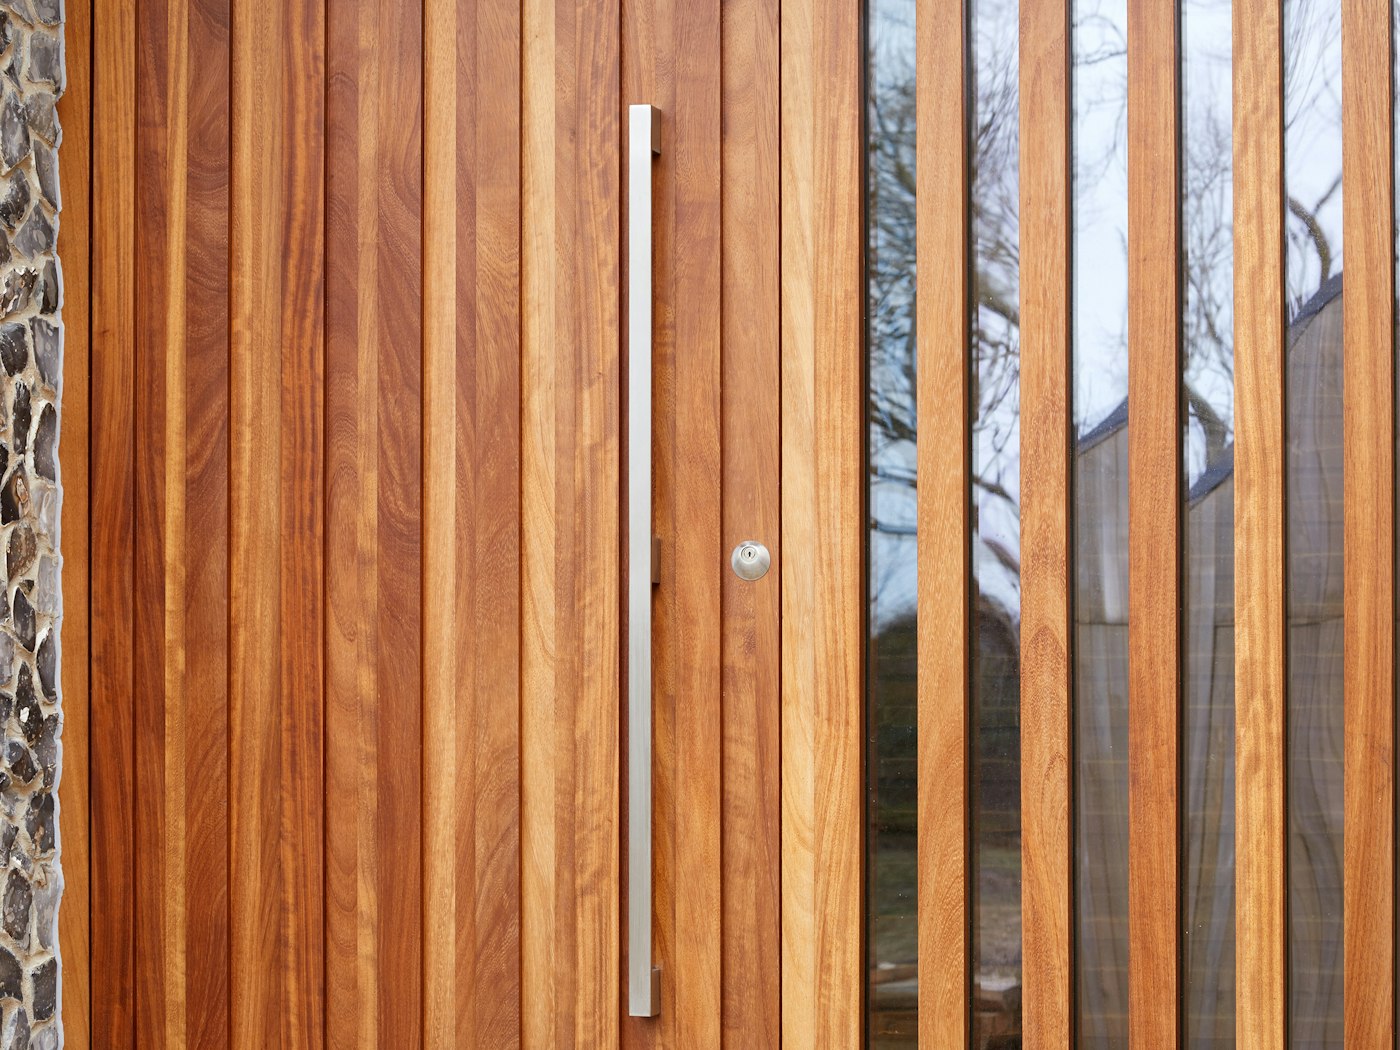 Our option 11 handle is a great match for this iroko door